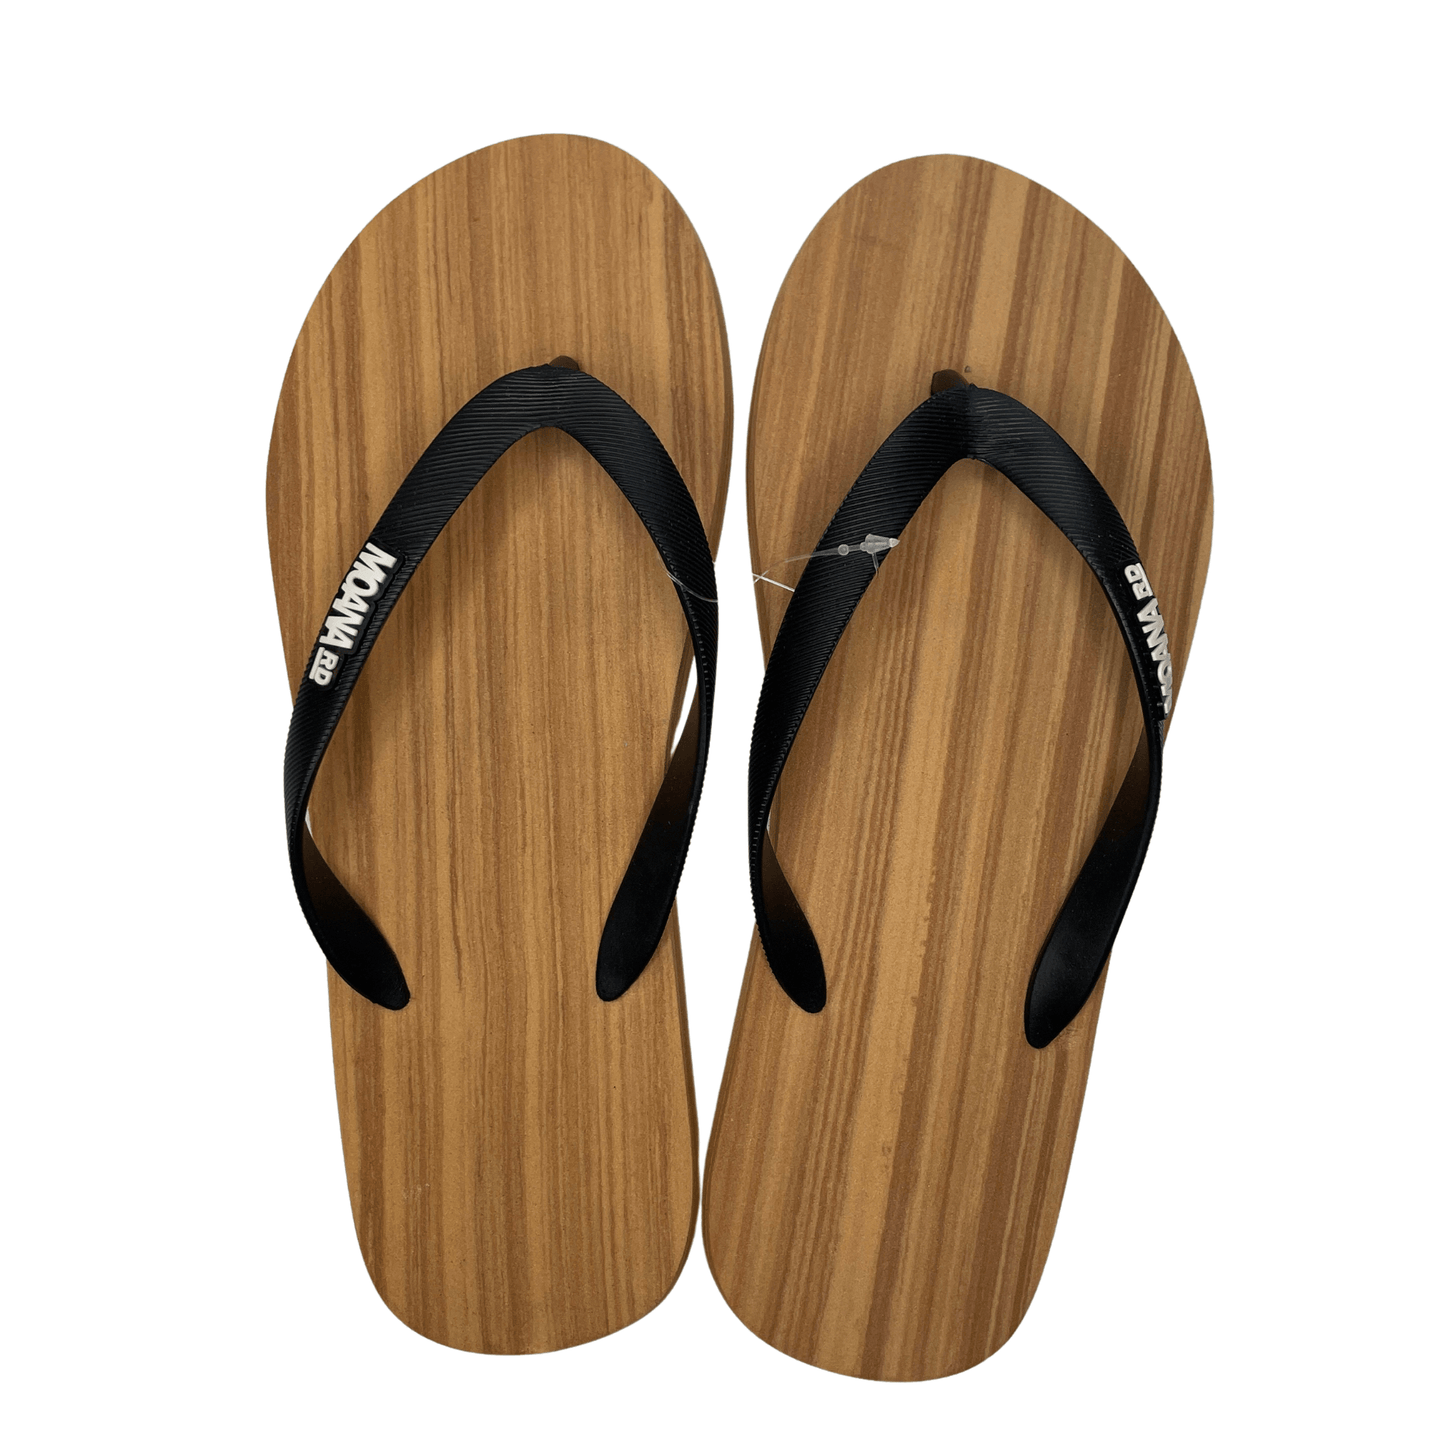 Wood grain patterned jandals with black straps on a white background.